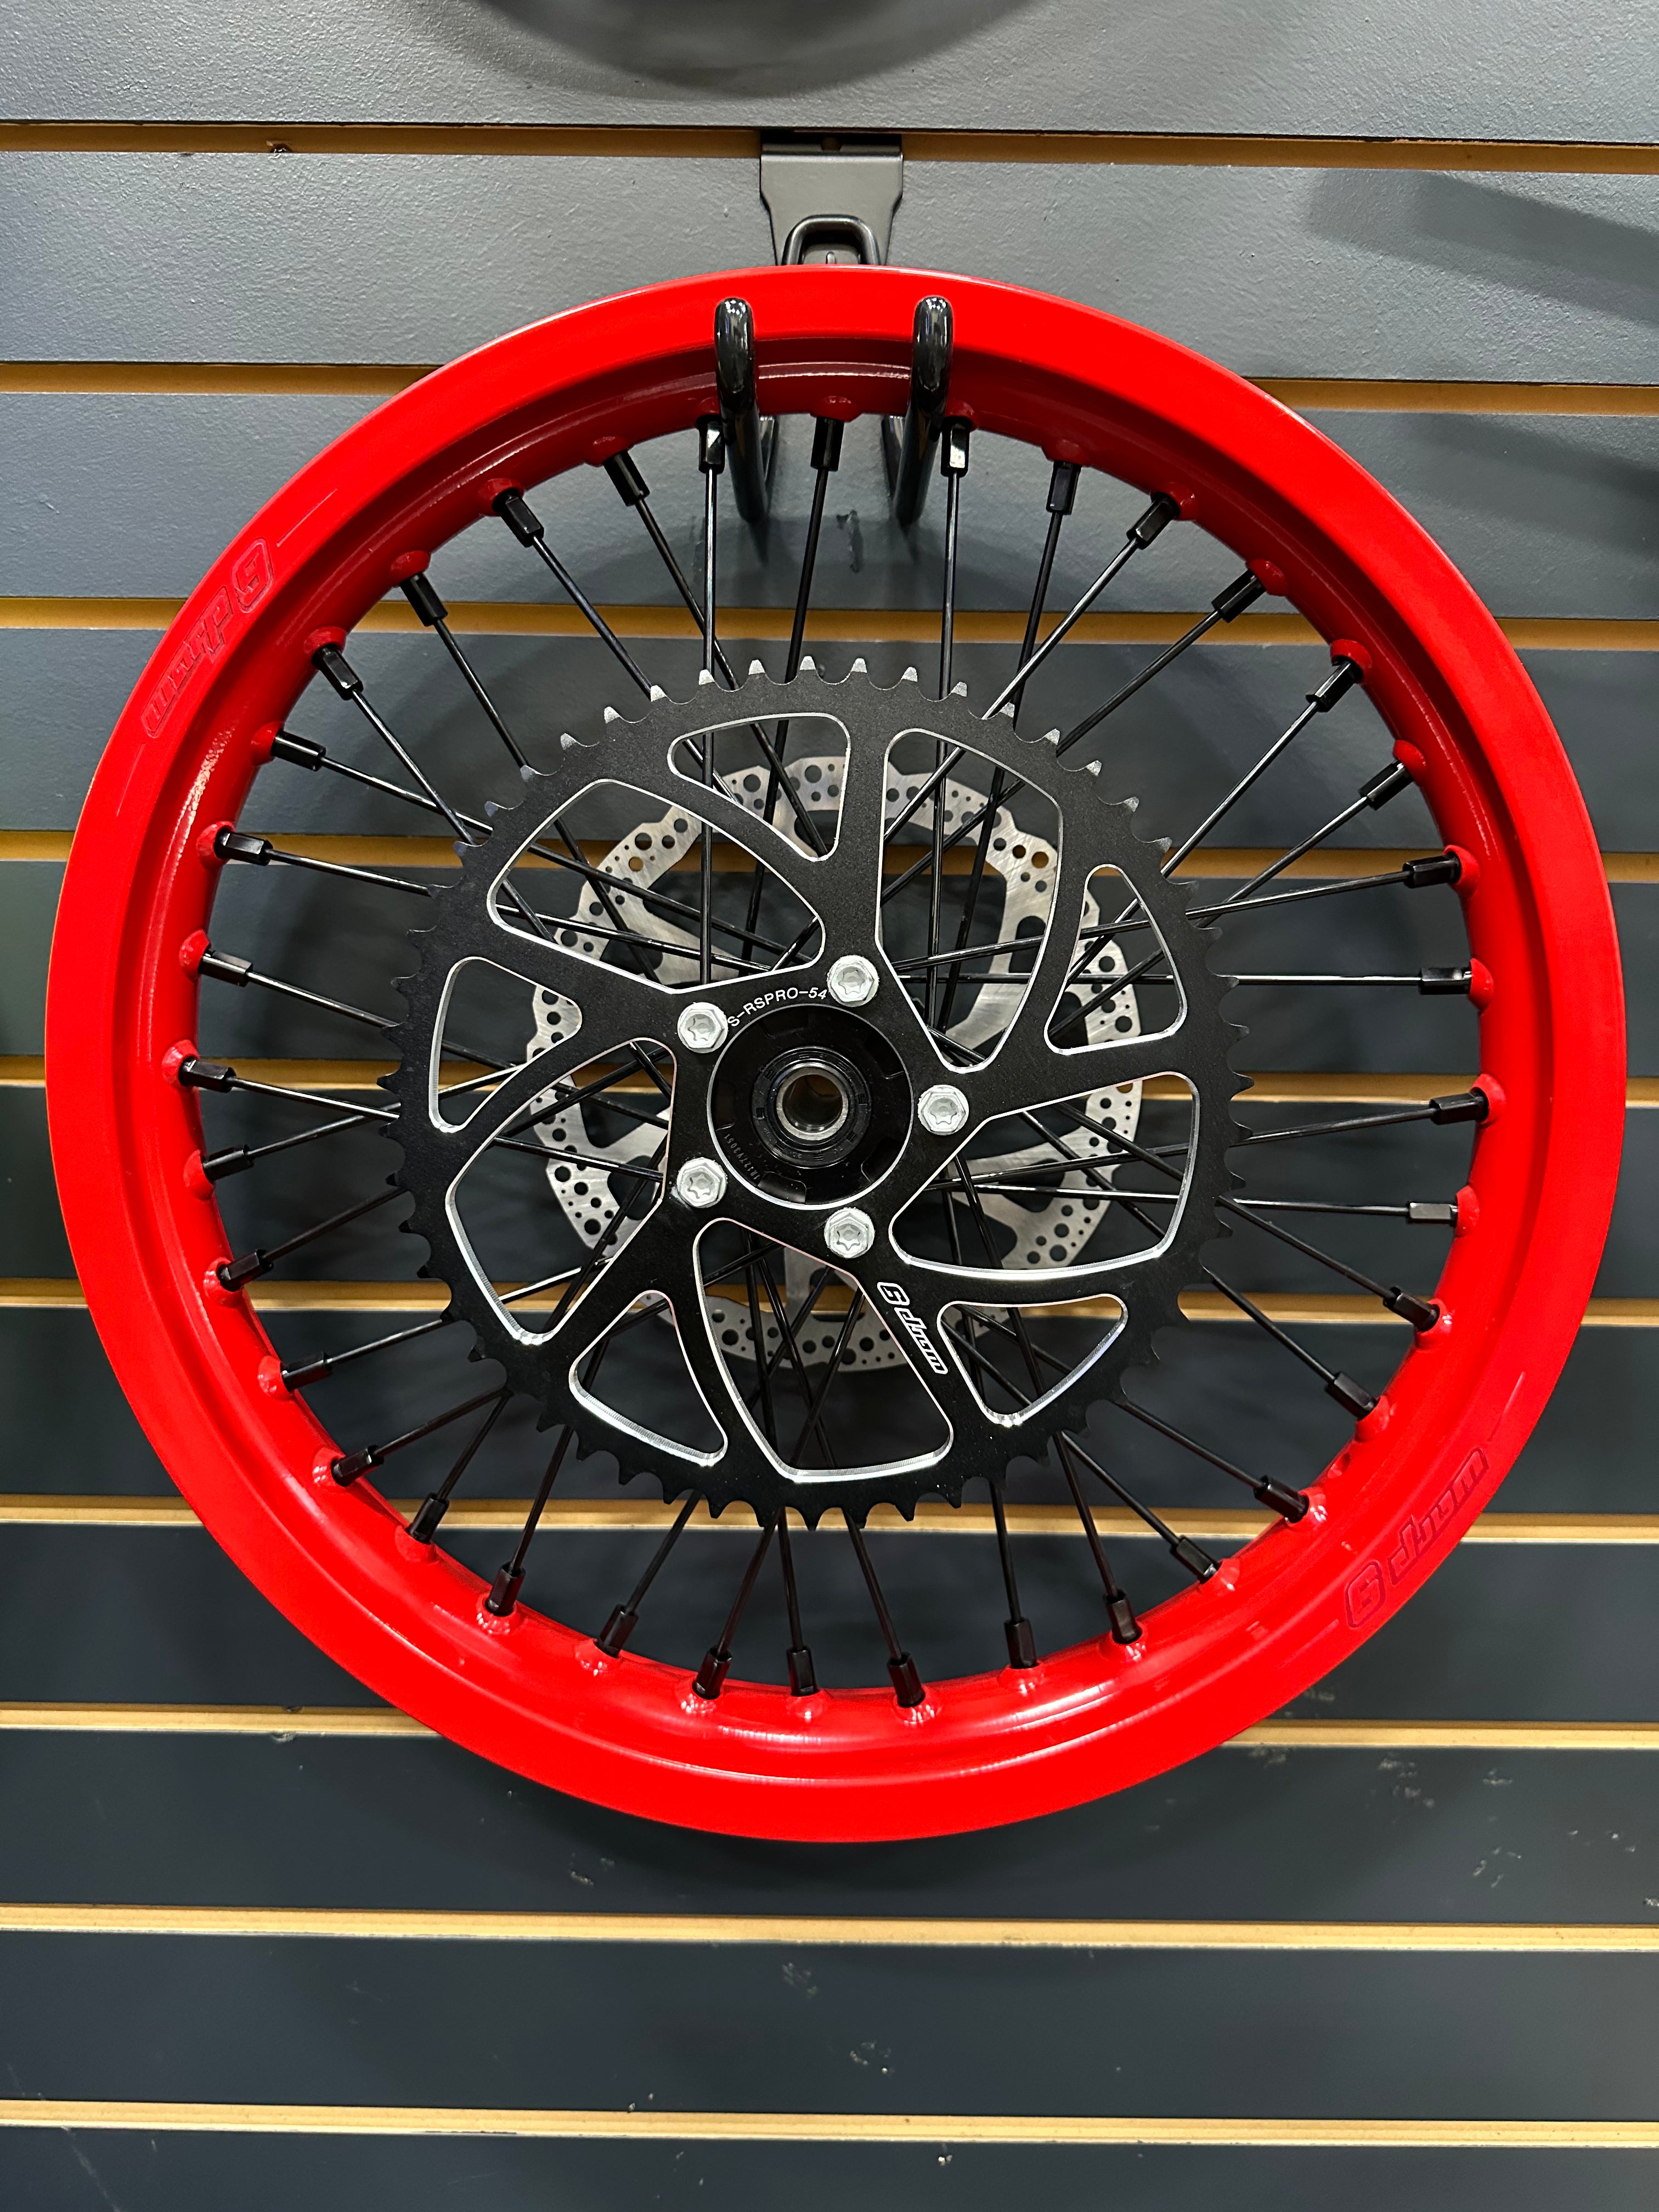 17" Warp 9 Supermoto Wheelset for Surron Light Bee and E Ride ProSS (Fast Shipping)